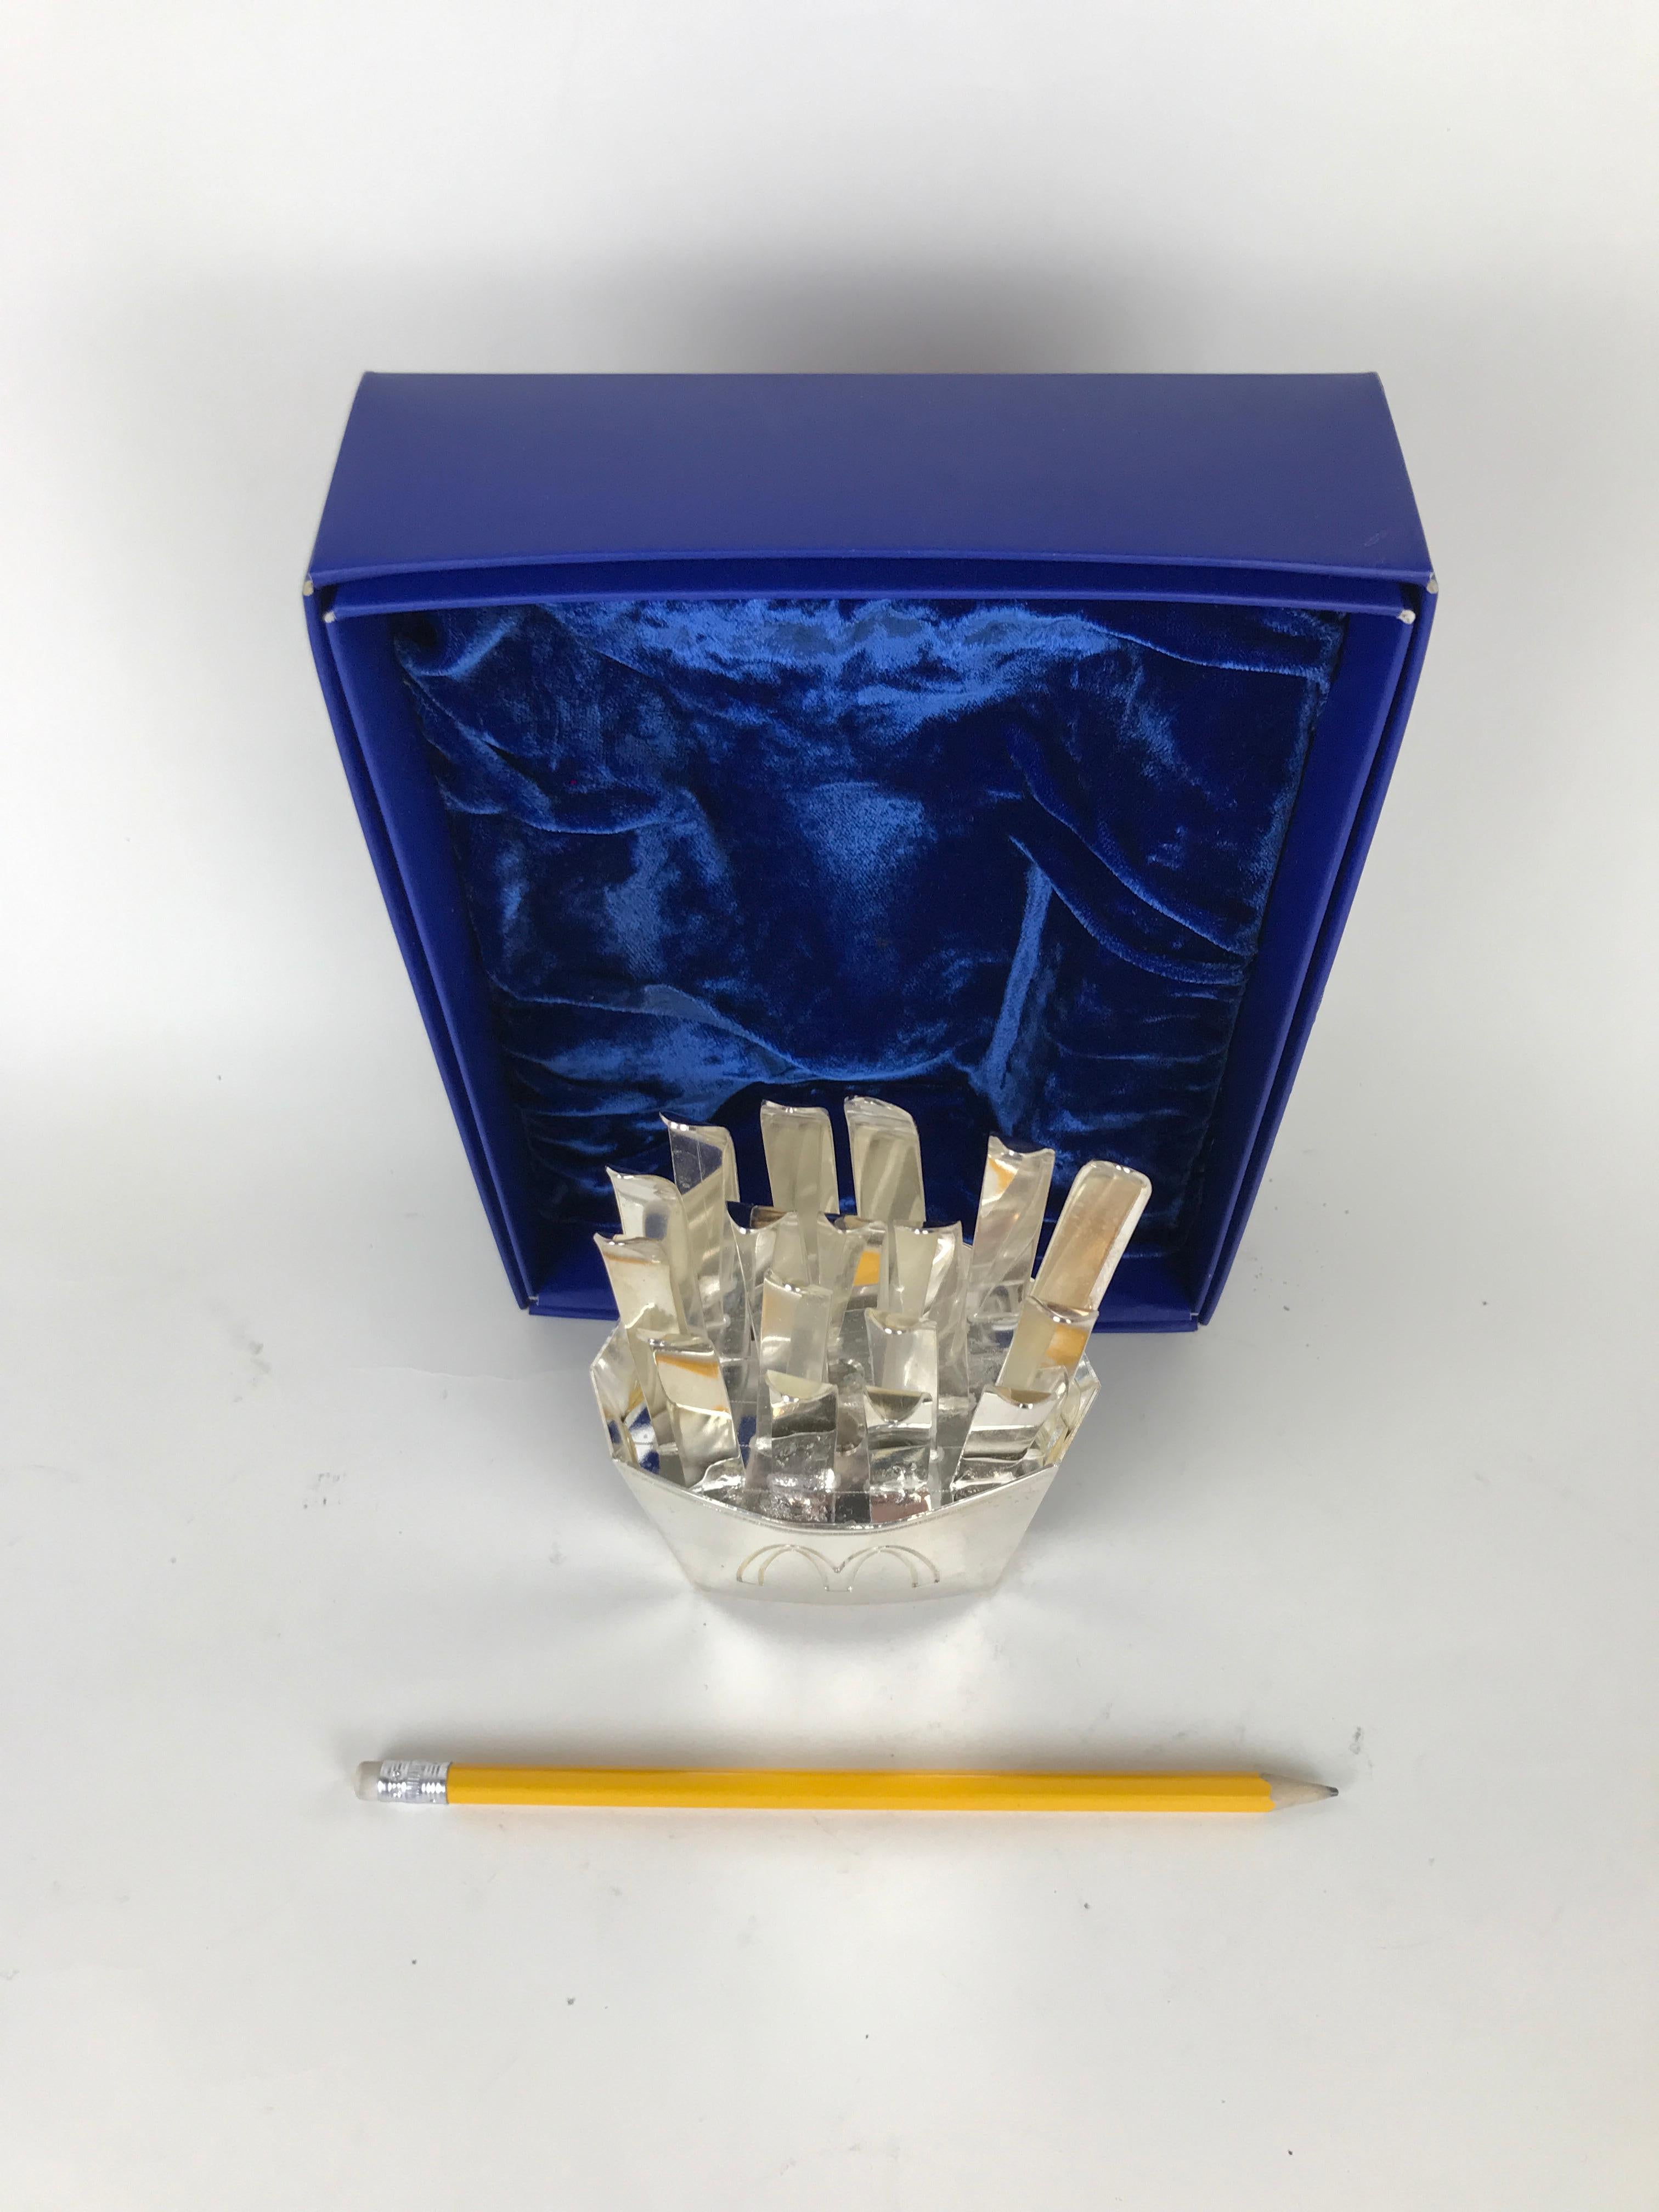 Highly collectible vintage McDonald's celebratory souvenir of the XX Olympic Winter Games held in Turin, Italy in 2006.

The souvenir is in the shape of the french fries McDonald's box but realized in bress silver plated with multiples skis